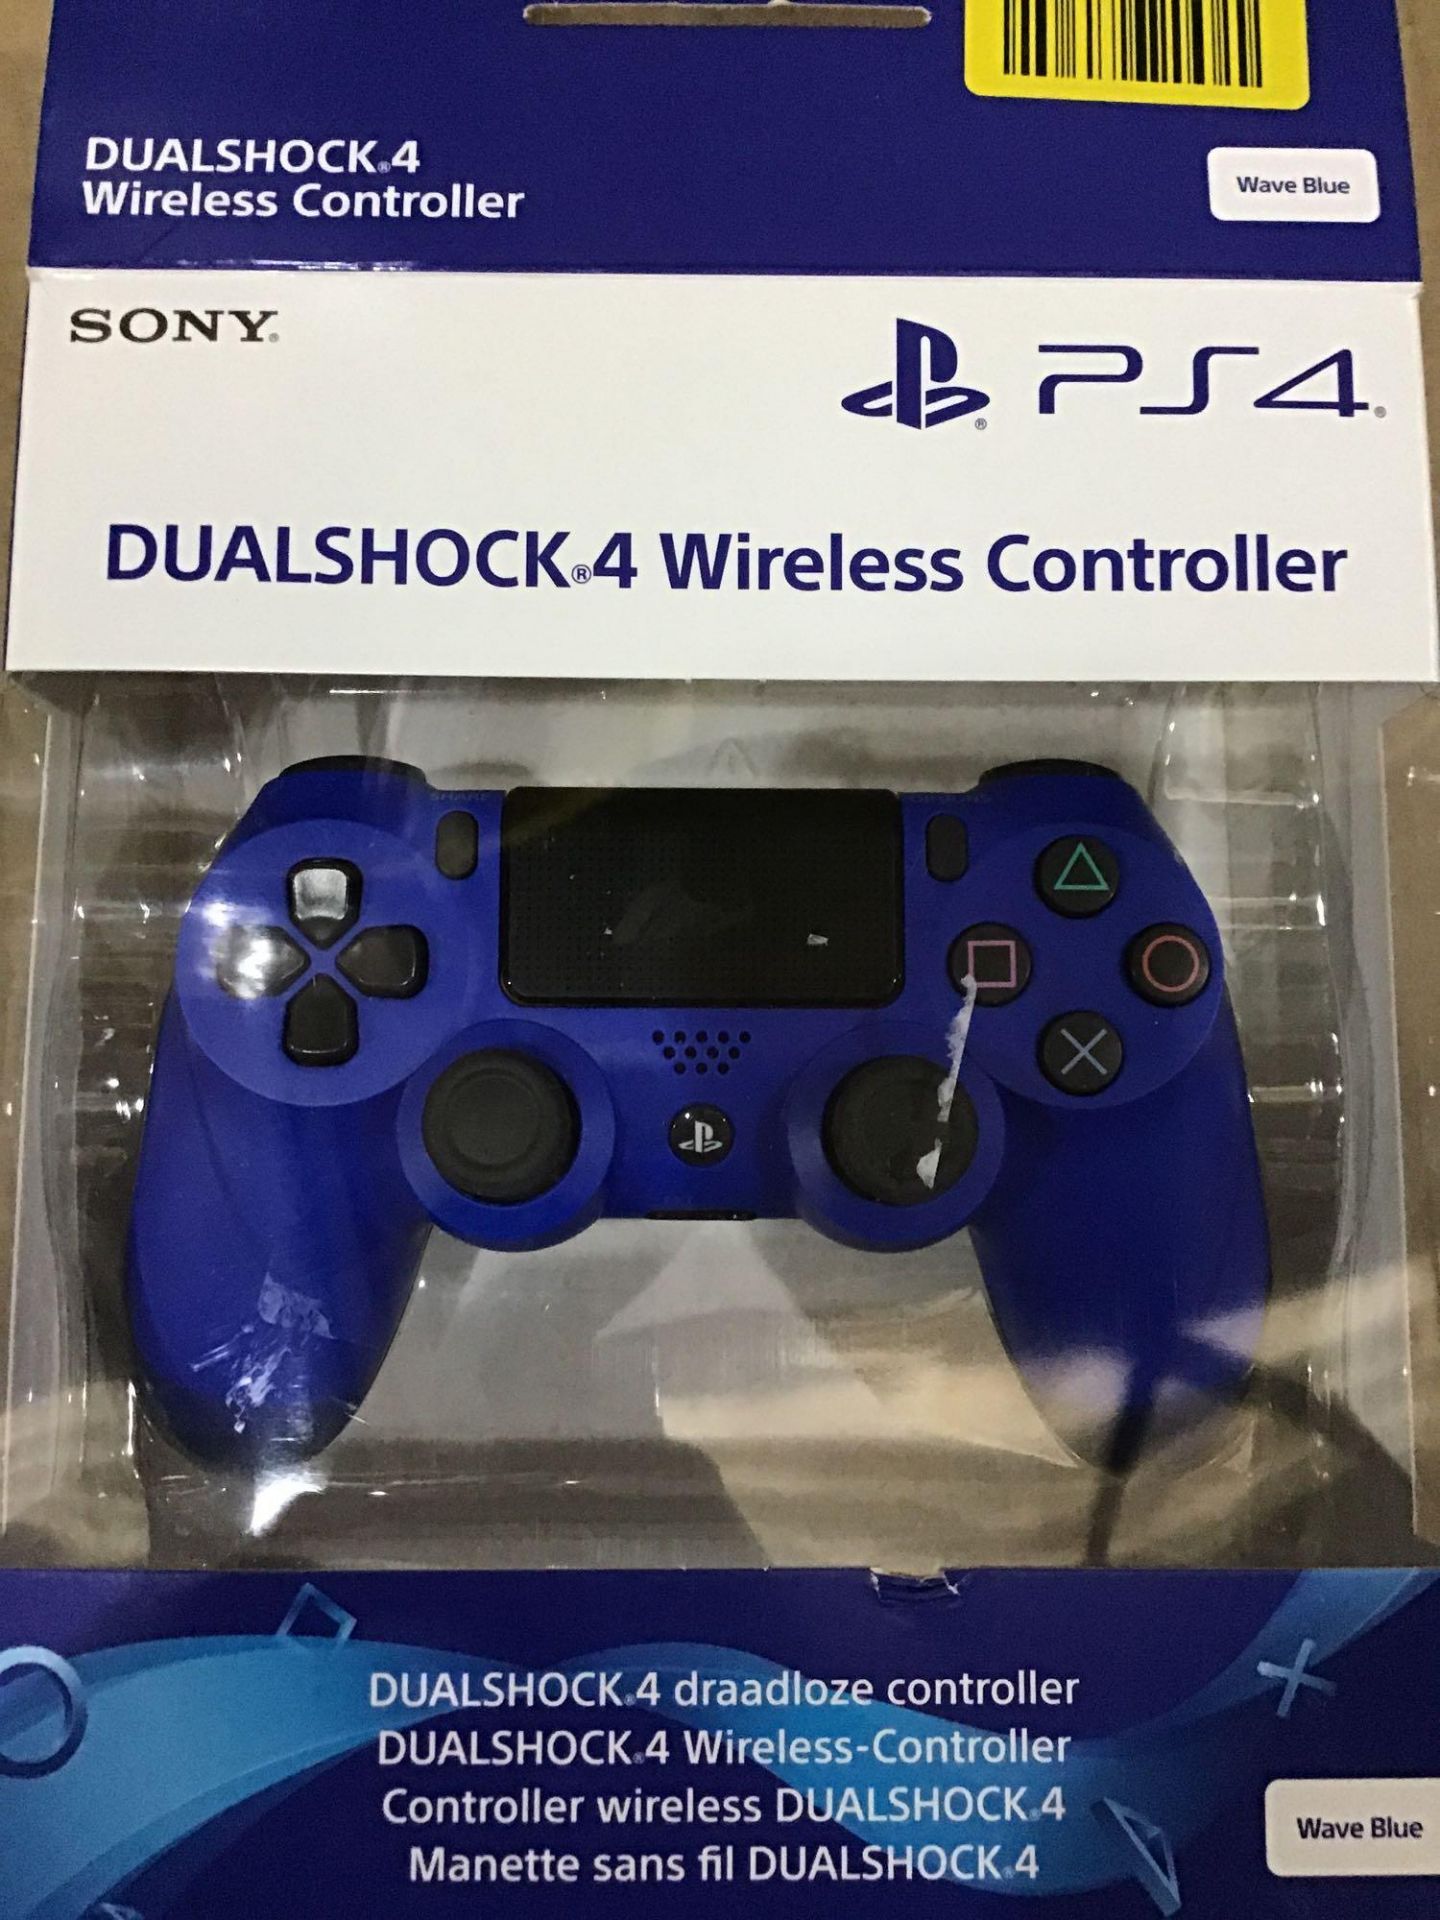 Sony PS4 DualShock 4 V2 Wireless Controller - Wave Blue - £38.08 RRP - Image 2 of 4